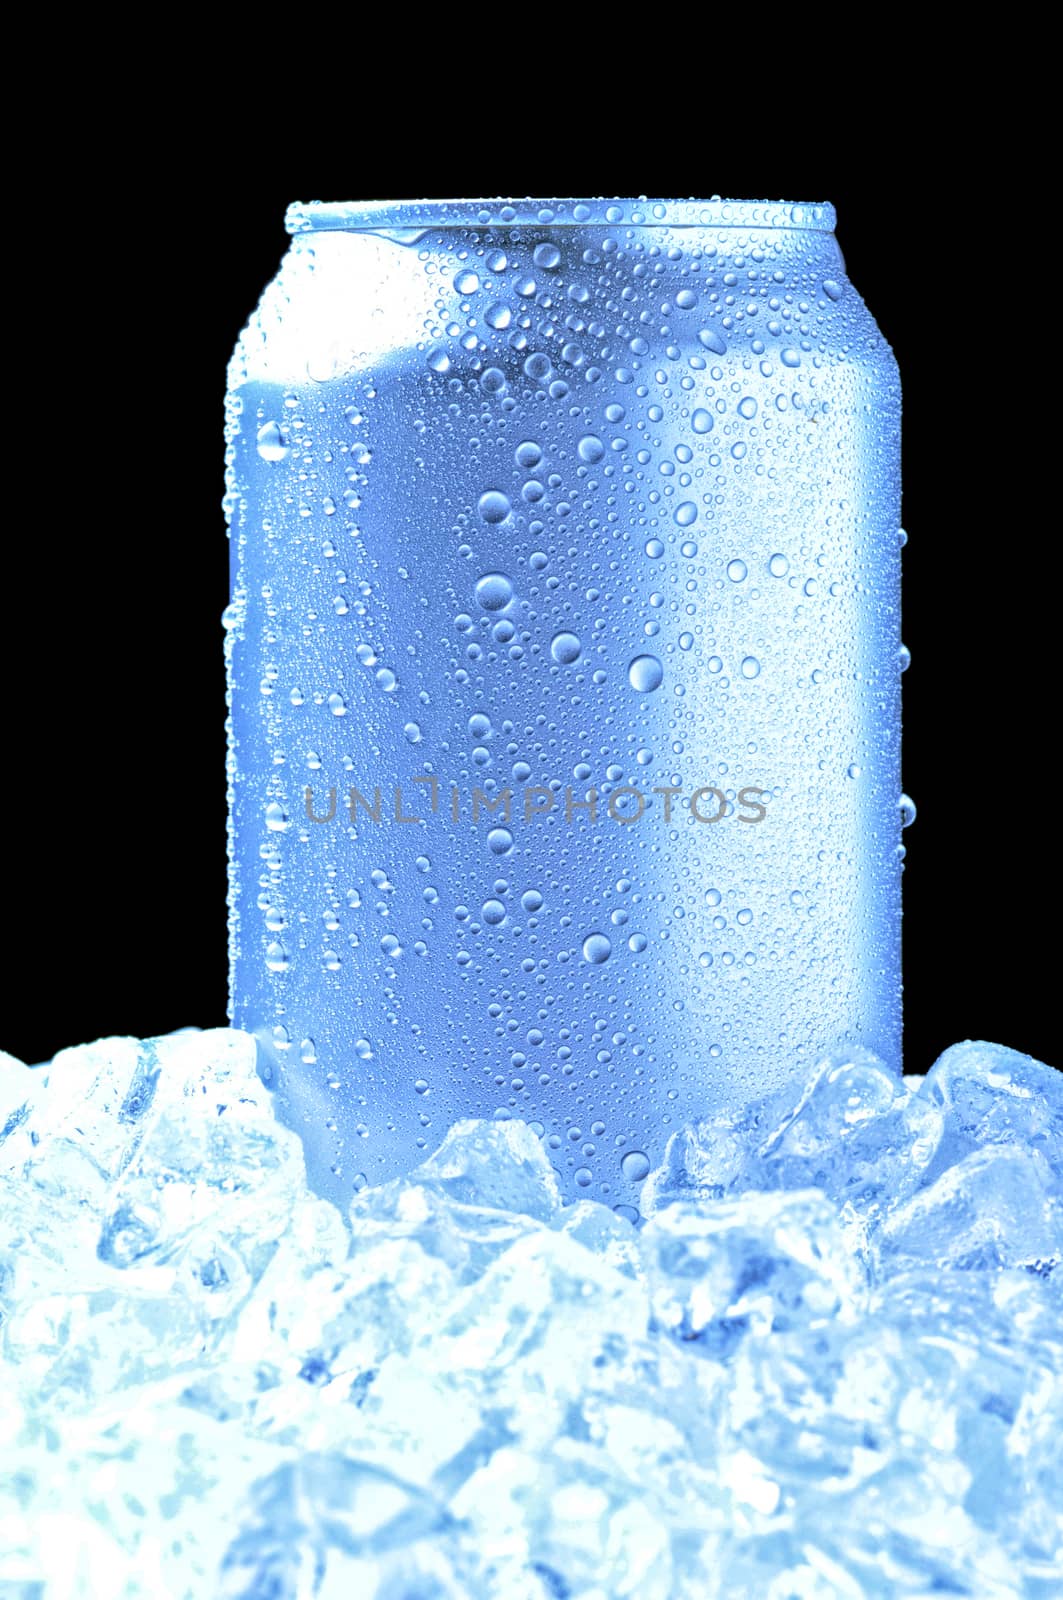 Aluminum Drink Can with water droplets Standing in a bed of ice - black background and cool tones